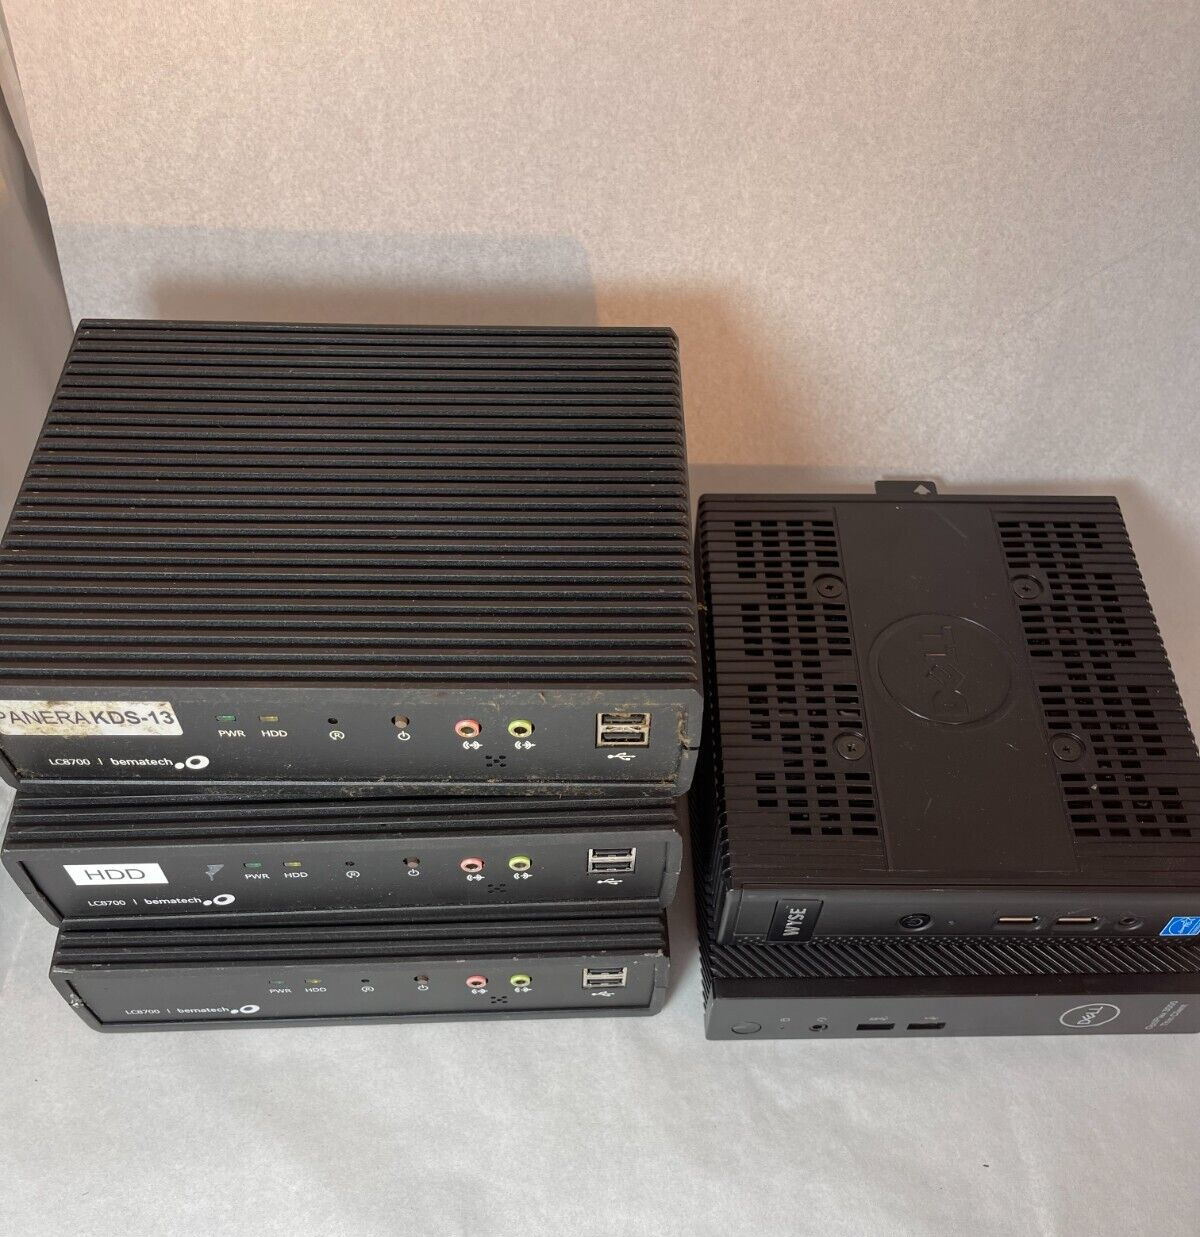 Lot of 5 Mini PCs, Dell, Wyse, Bematech - As Is